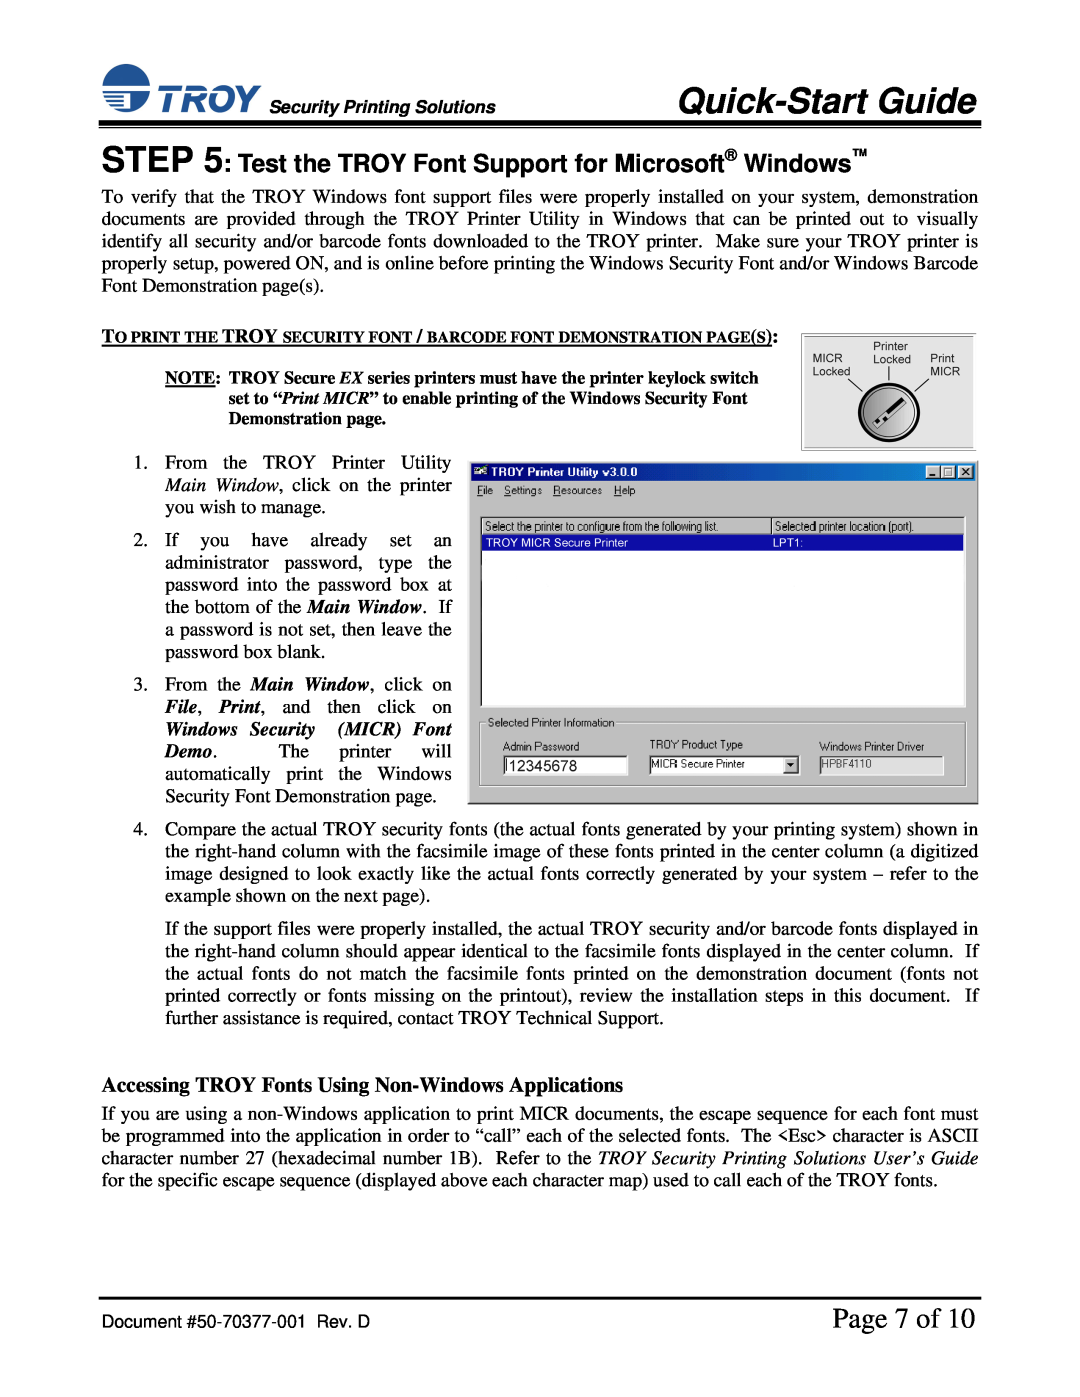 TROY Group IRD 4200 Page 7 of, Test the TROY Font Support for Microsoft Windows, Quick-Start Guide 